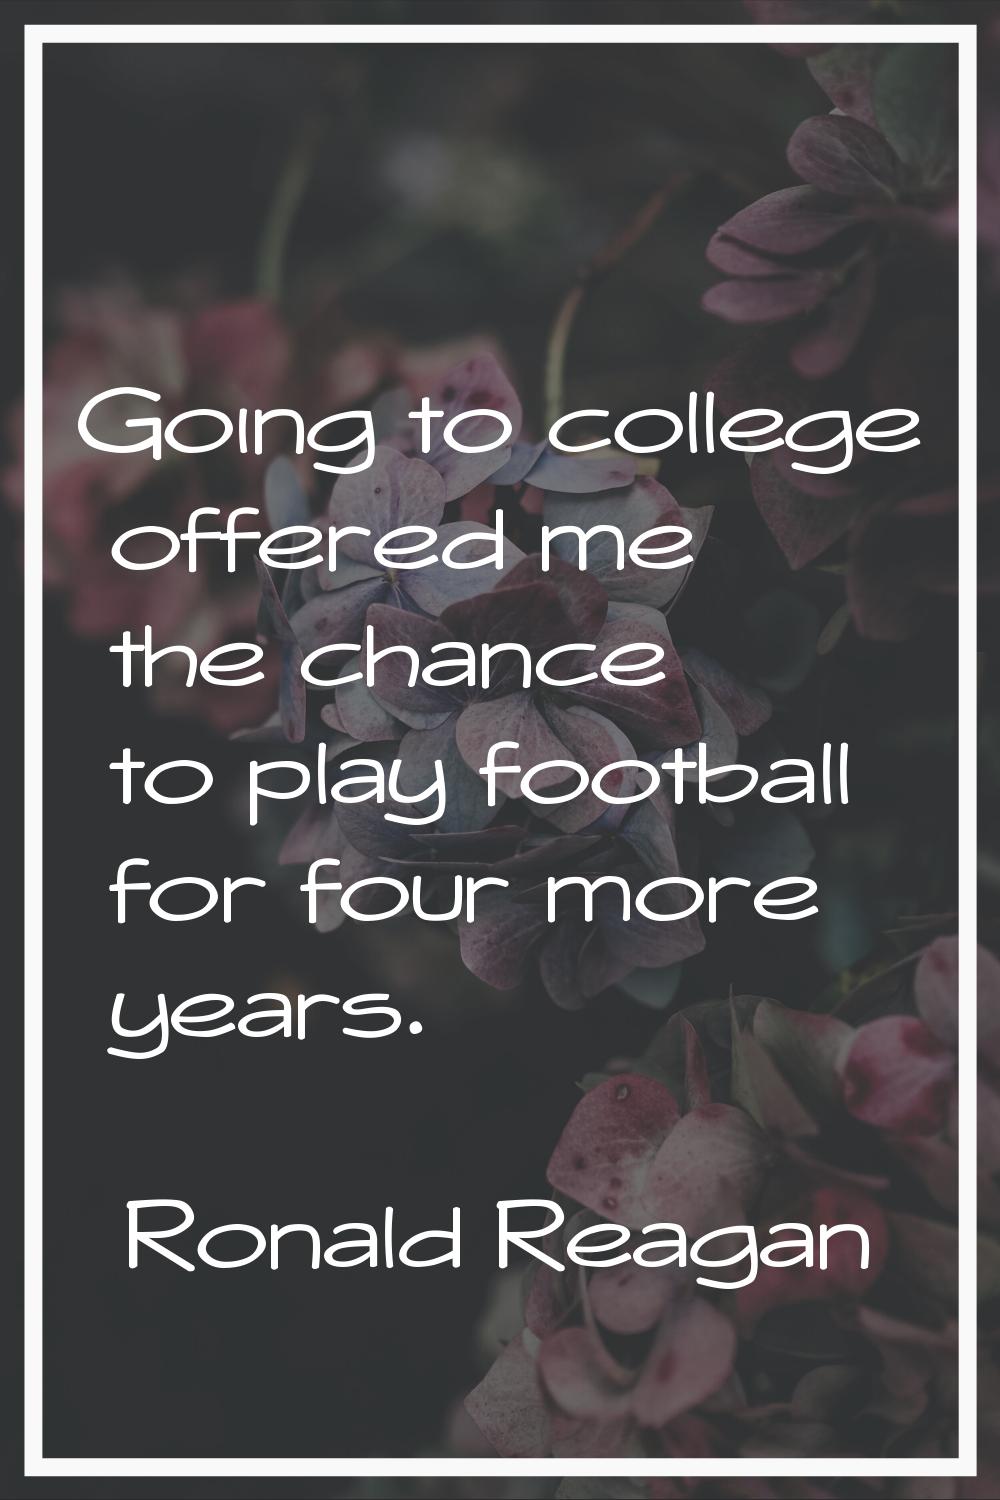 Going to college offered me the chance to play football for four more years.